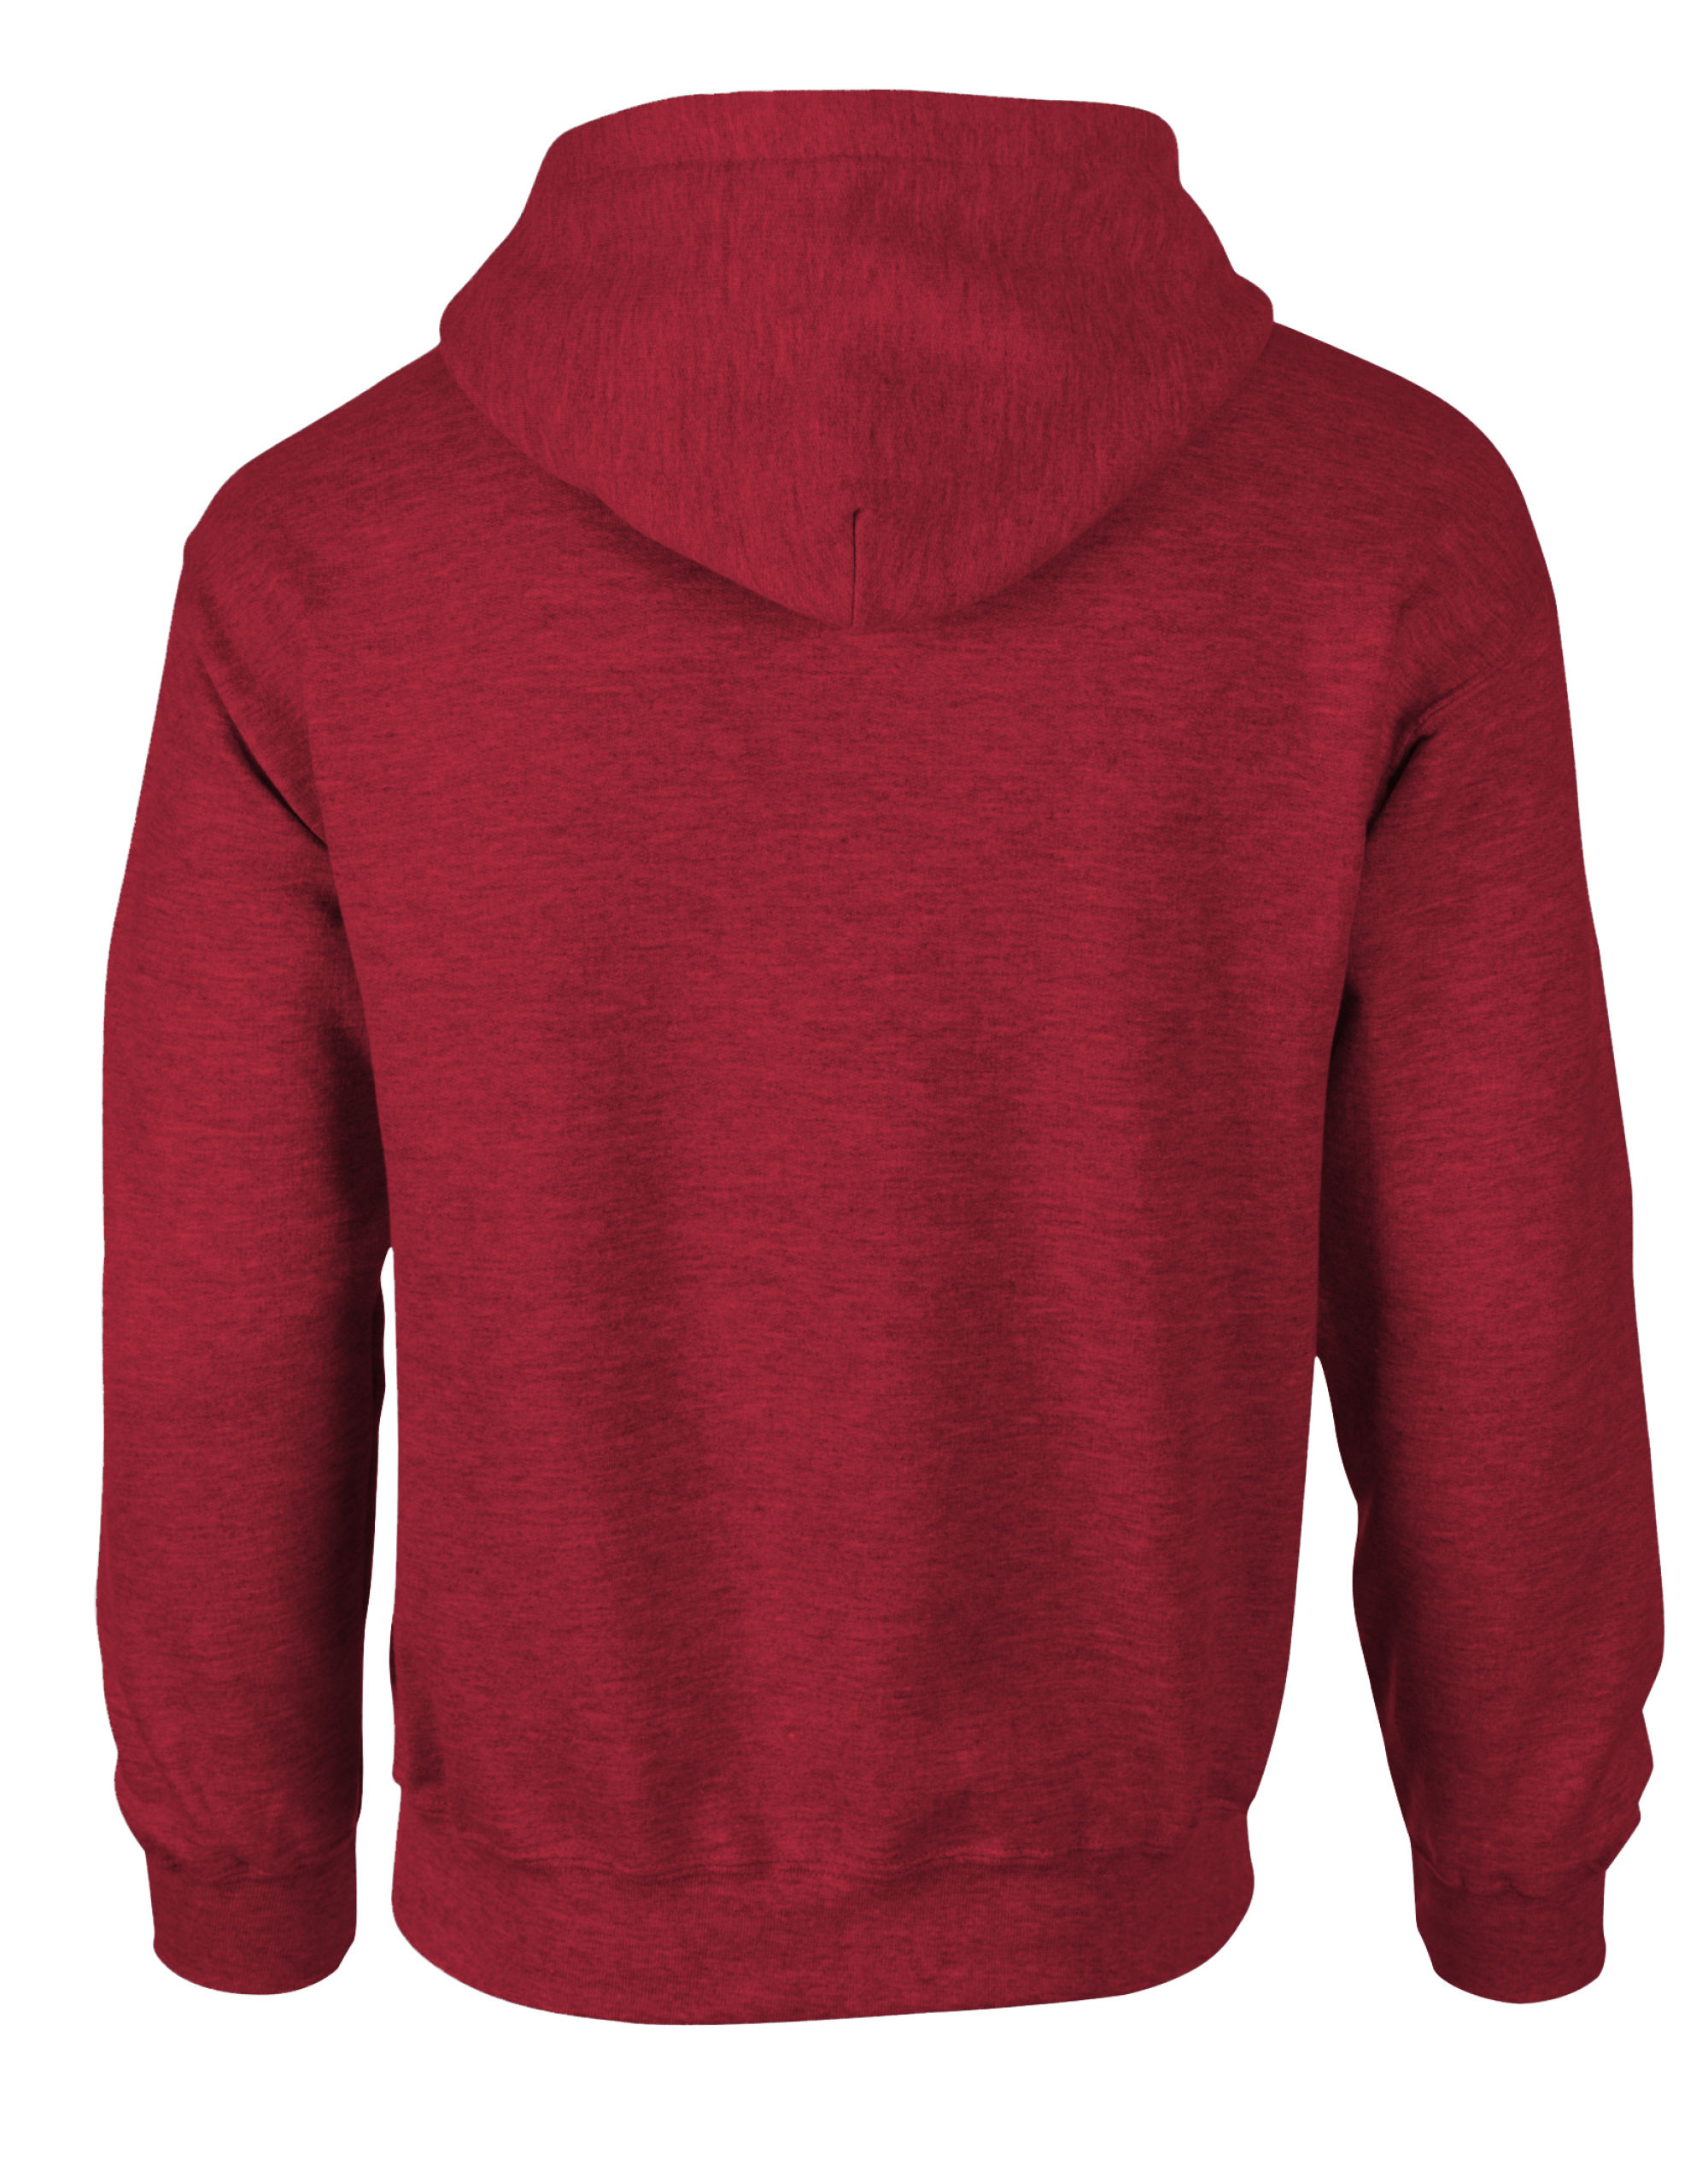 Picture of Heavy Blend™ Adult Hooded Sweatshirt